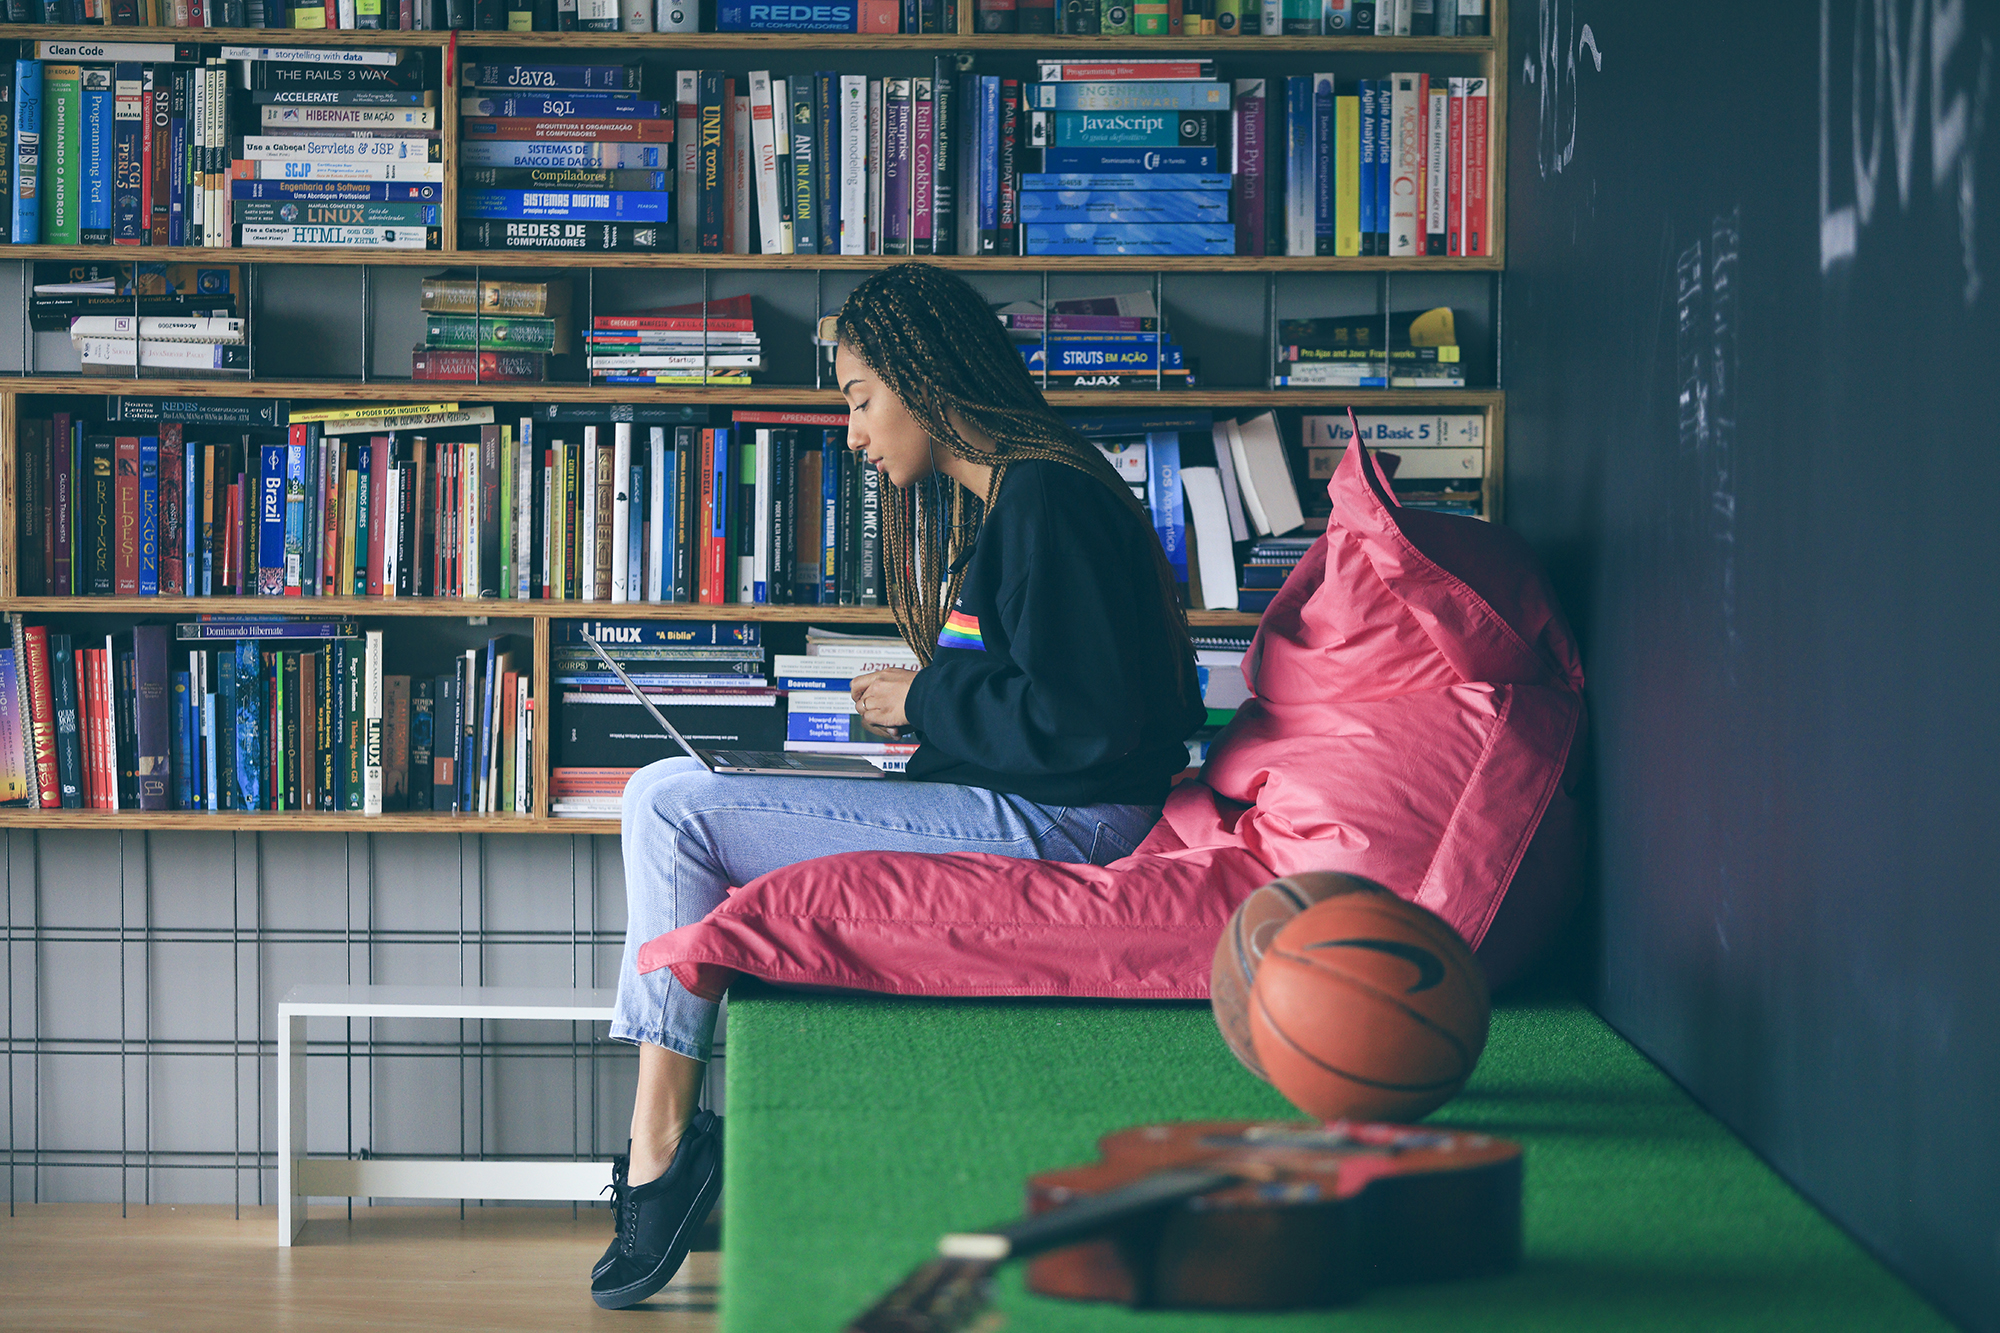 Girl relaxing by a bookshelf, looking at her laptop